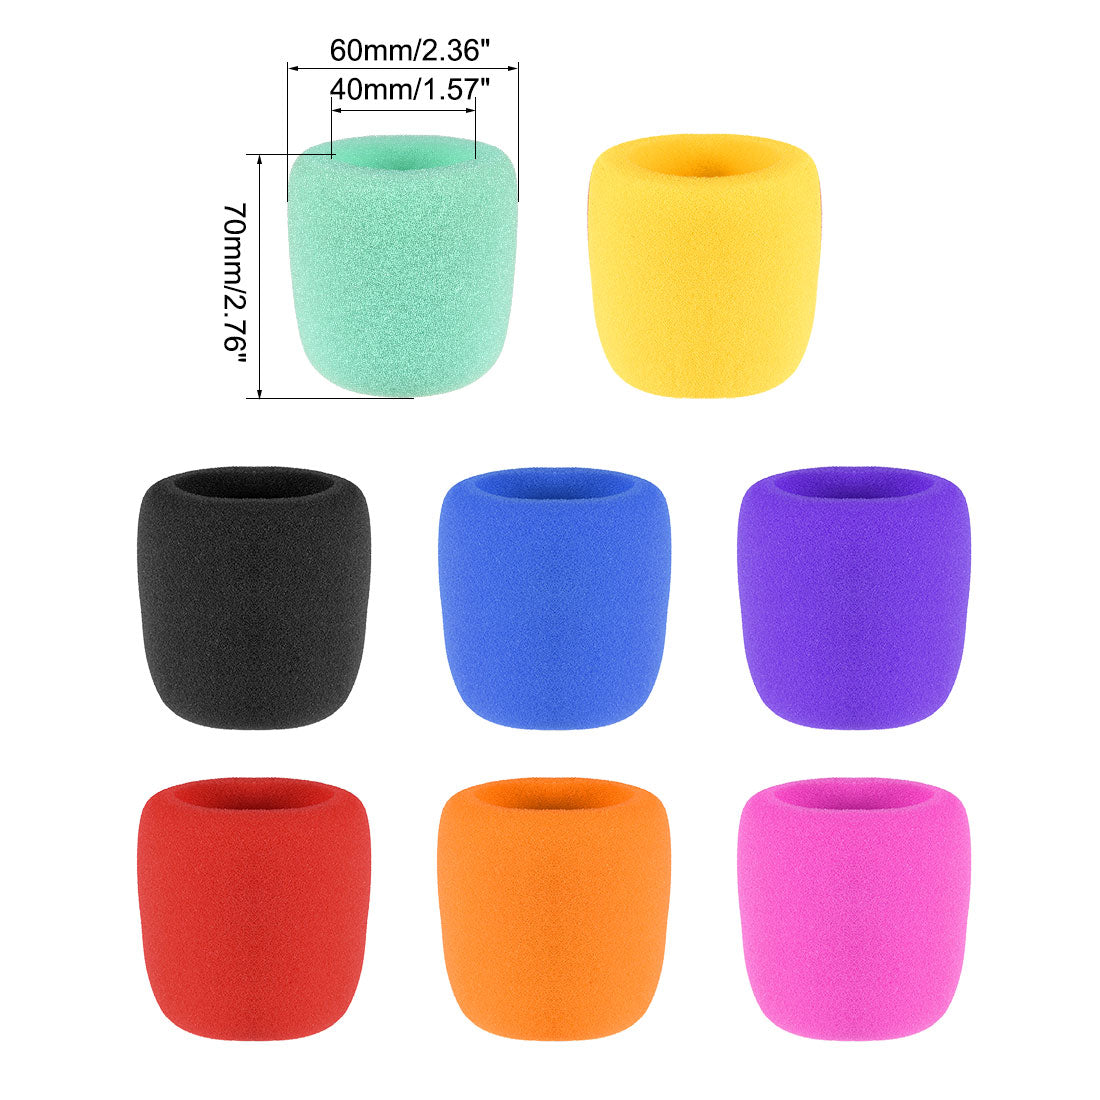 uxcell Uxcell 8Pack Thicken Sponge Foam Mic Cover Handheld Microphone Windscreen Pack for KTV